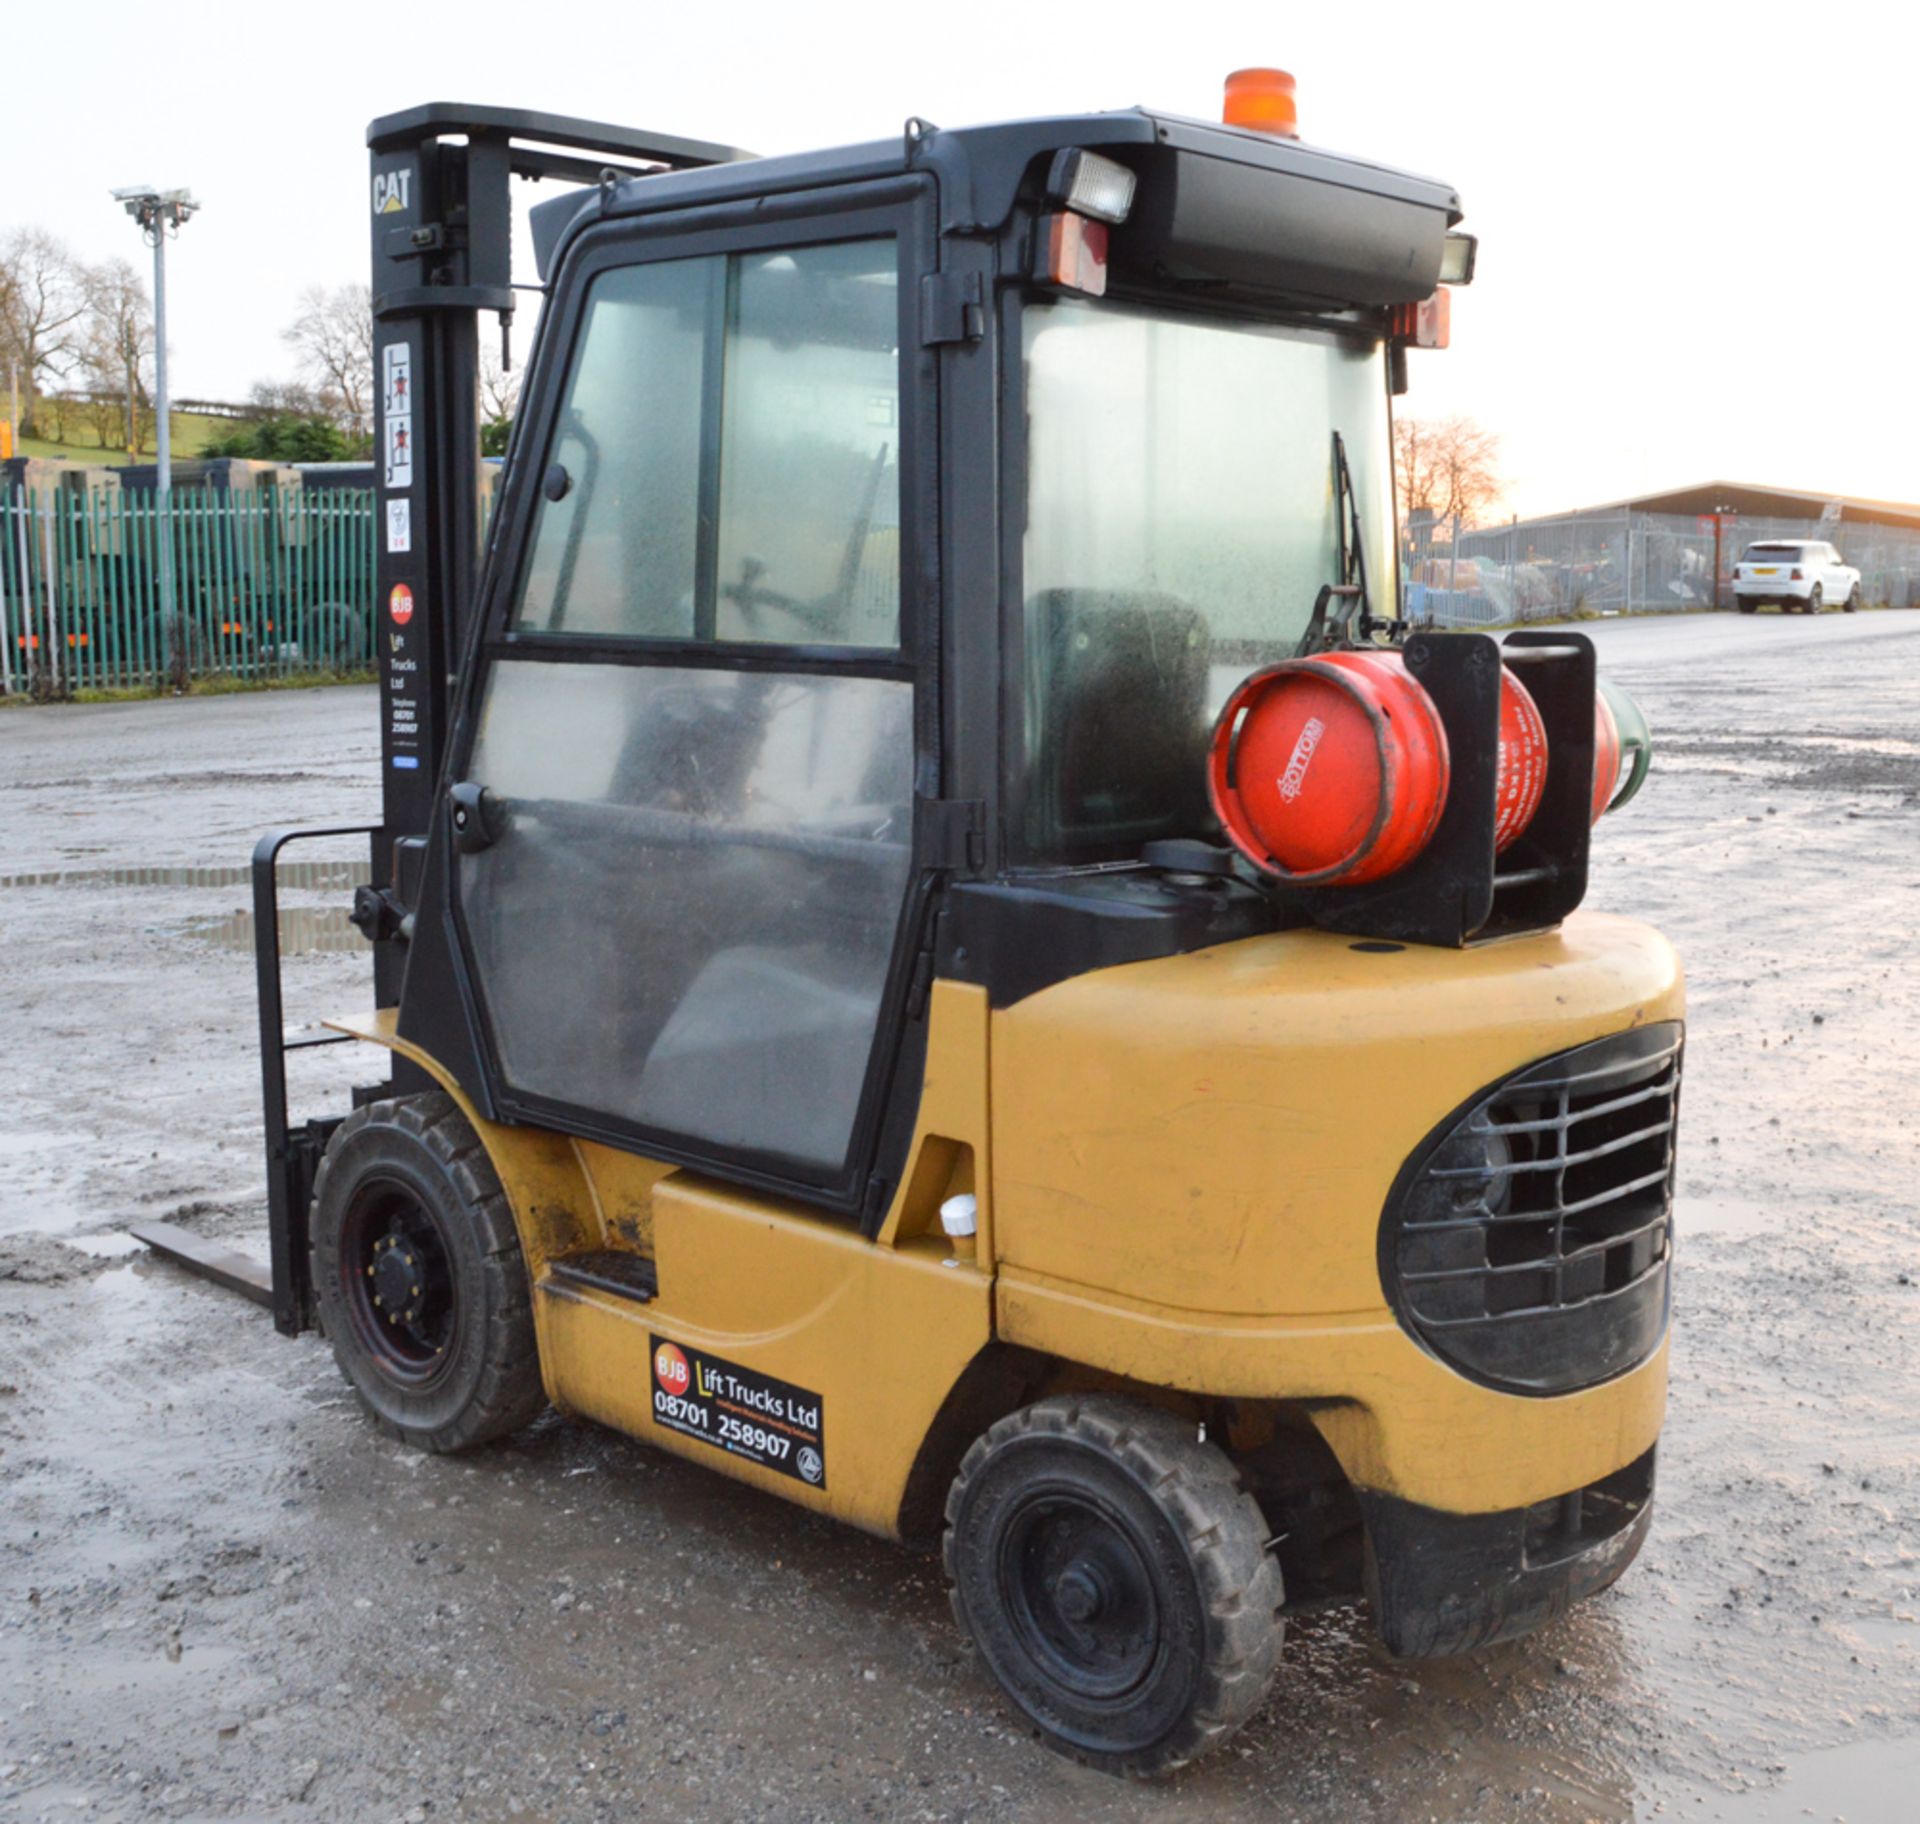 Caterpillar GP25K 2.5 tonne gas powered fork lift truck Year: 2004 S/N: 66657 Recorded Hours: 6234 - Image 3 of 7